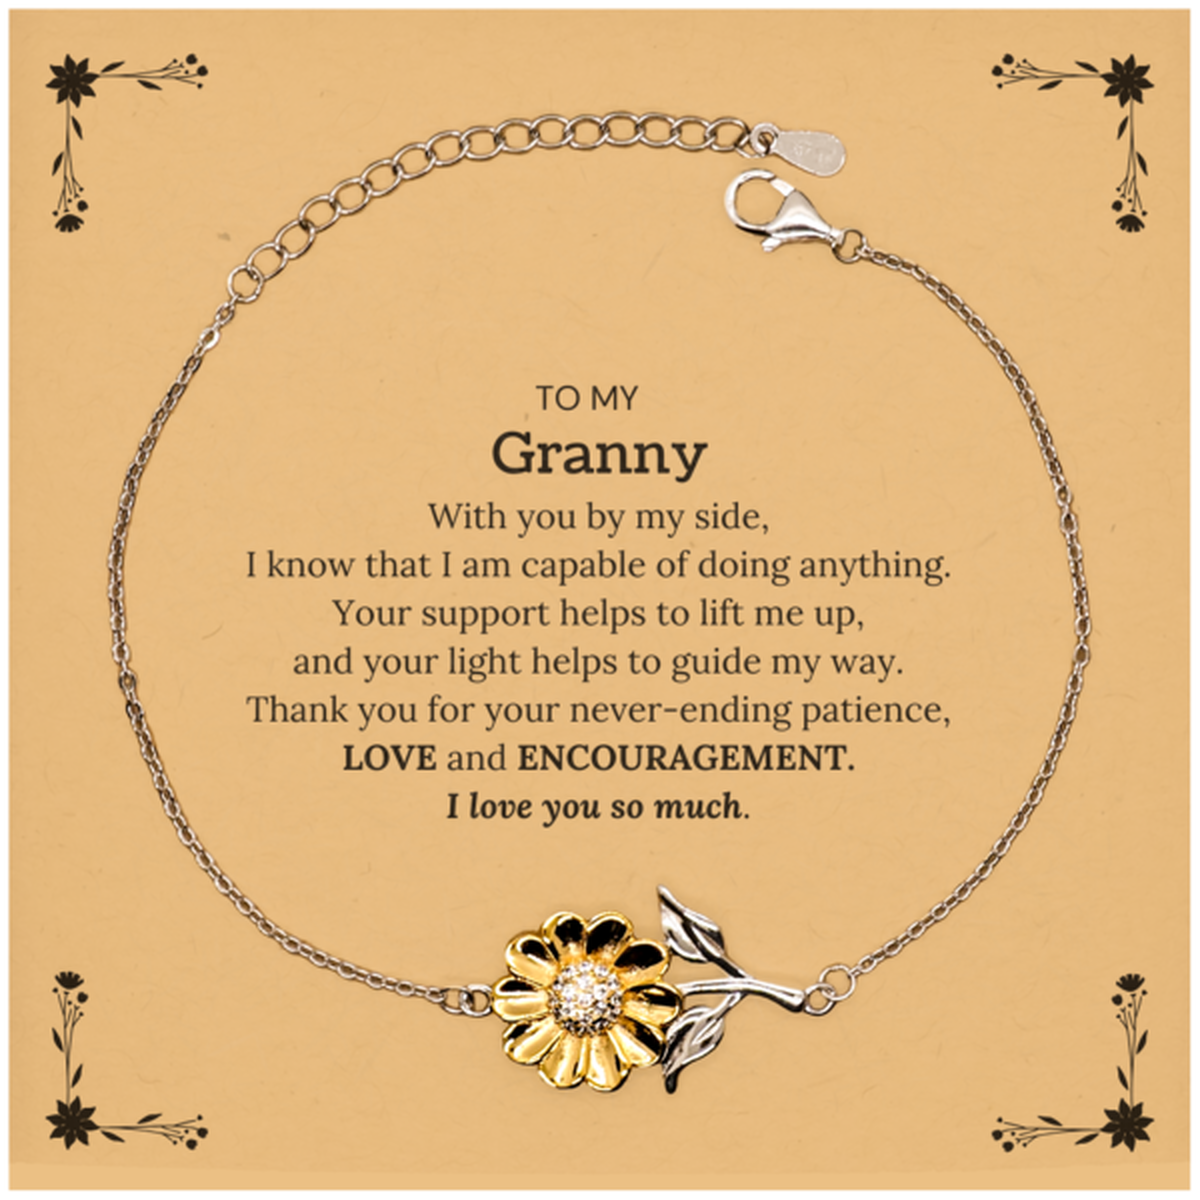 Appreciation Granny Sunflower Bracelet Gifts, To My Granny Birthday Christmas Wedding Keepsake Gifts for Granny With you by my side, I know that I am capable of doing anything. I love you so much